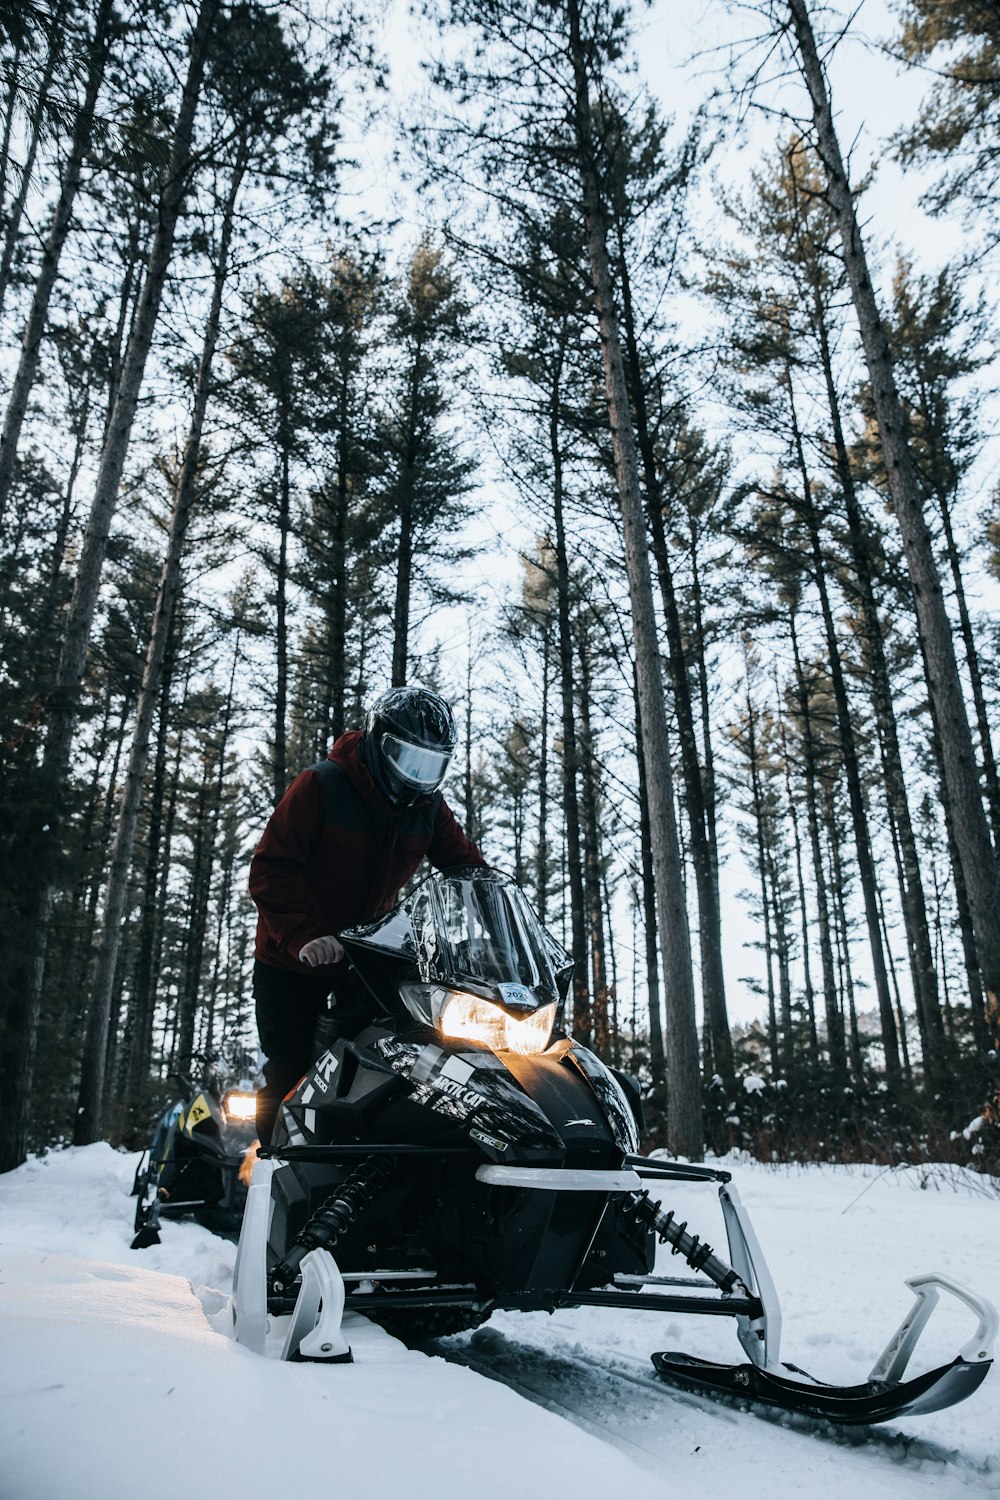 man riding motorcycle on snow covered ground during daytime